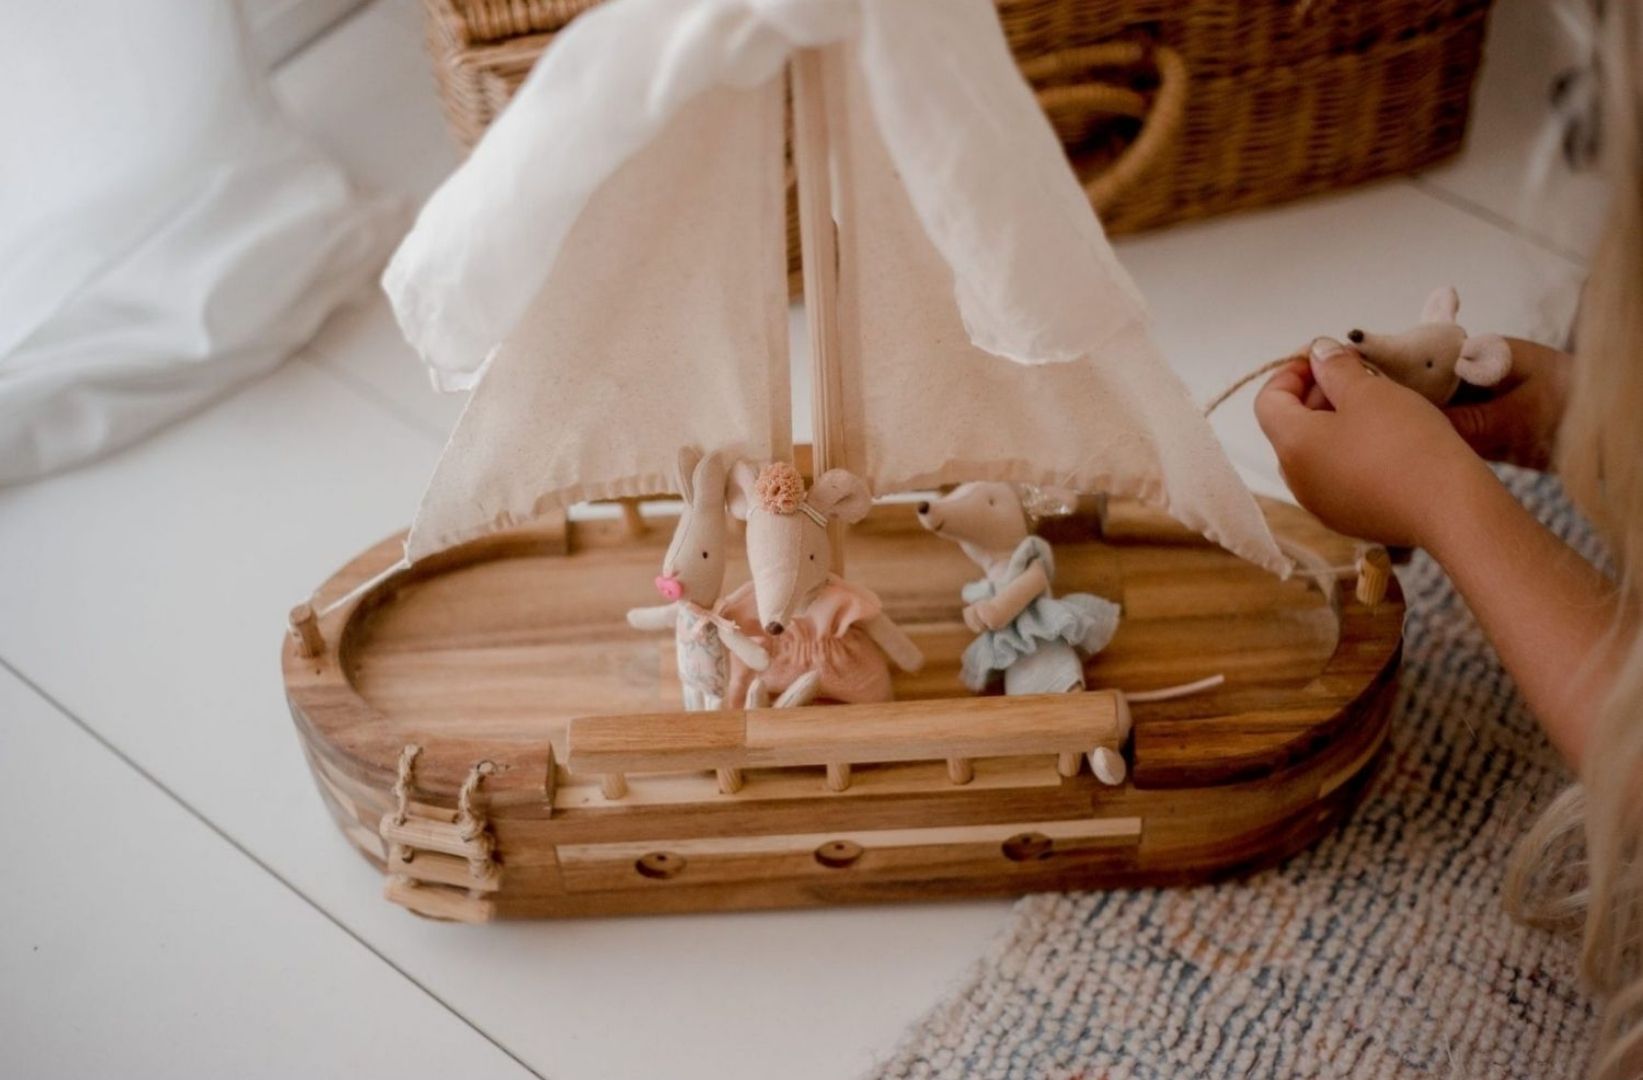 Non toxic wooden ship toy with soft toys aboard